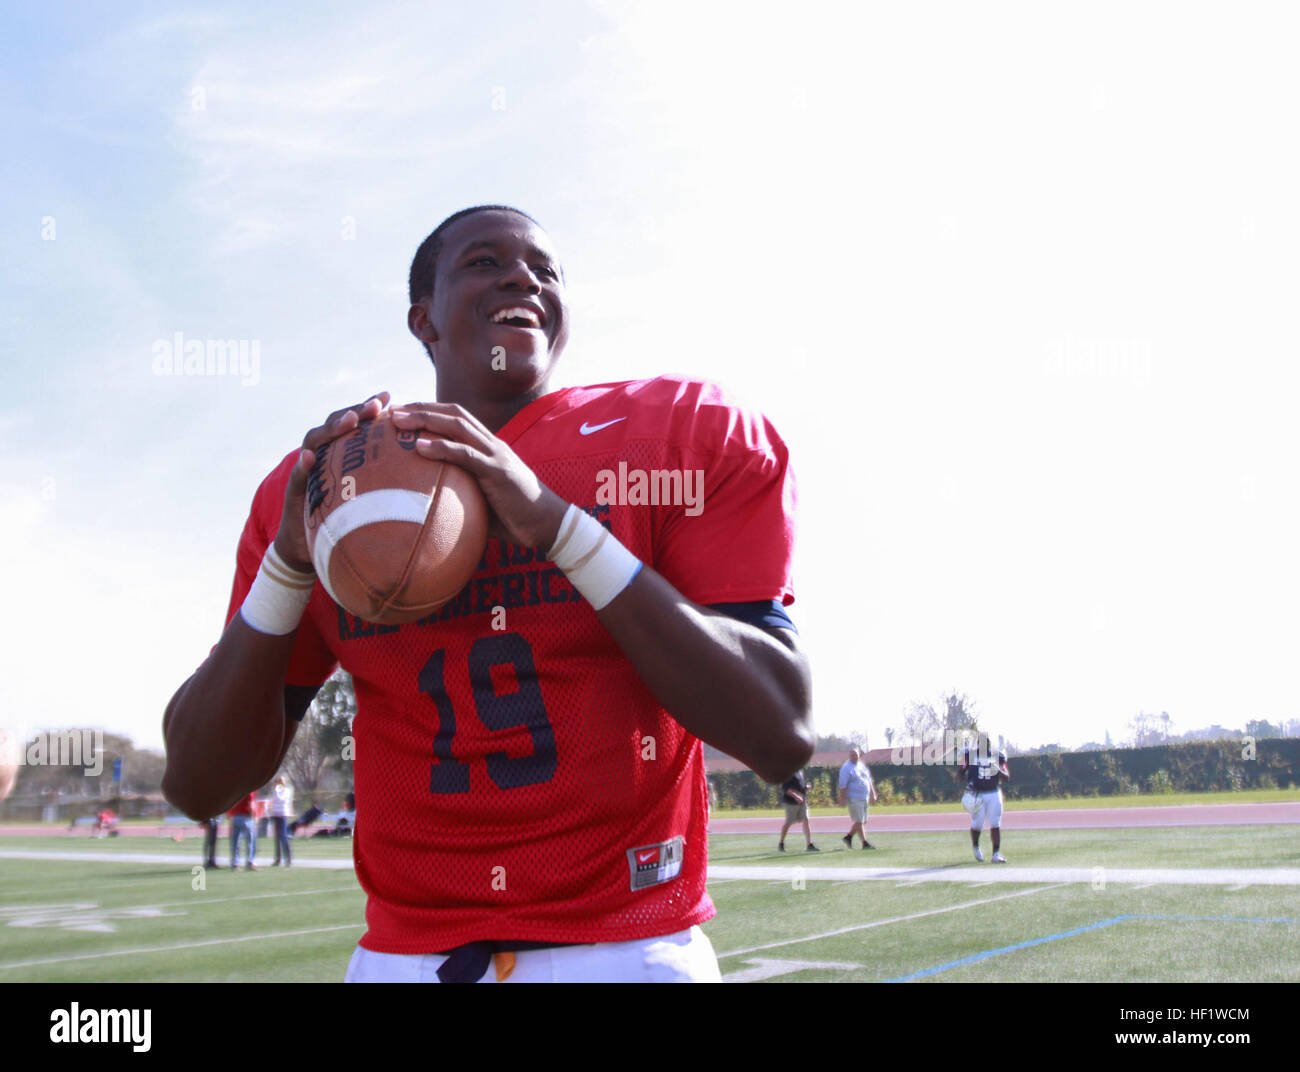 Fulerton, Calif. - Quentin Gibson, quarterback for the Semper Fidelis All-American Bowl East Team smiles before throwing a football to his teammate, Jan. 3, 2014. The Semper Fidelis All-American Bowl will be held on Jan. 5, 2014, at 6 p.m. PST in Carson, Calif., at The StubHub Center and aired live on Fox Sports 1. (Official U.S. Marine Corps photo by Sgt. Andres J. Lugo/Released) Semper Fidelis All-American Football Practice 140103-M-QG862-019 Stock Photo